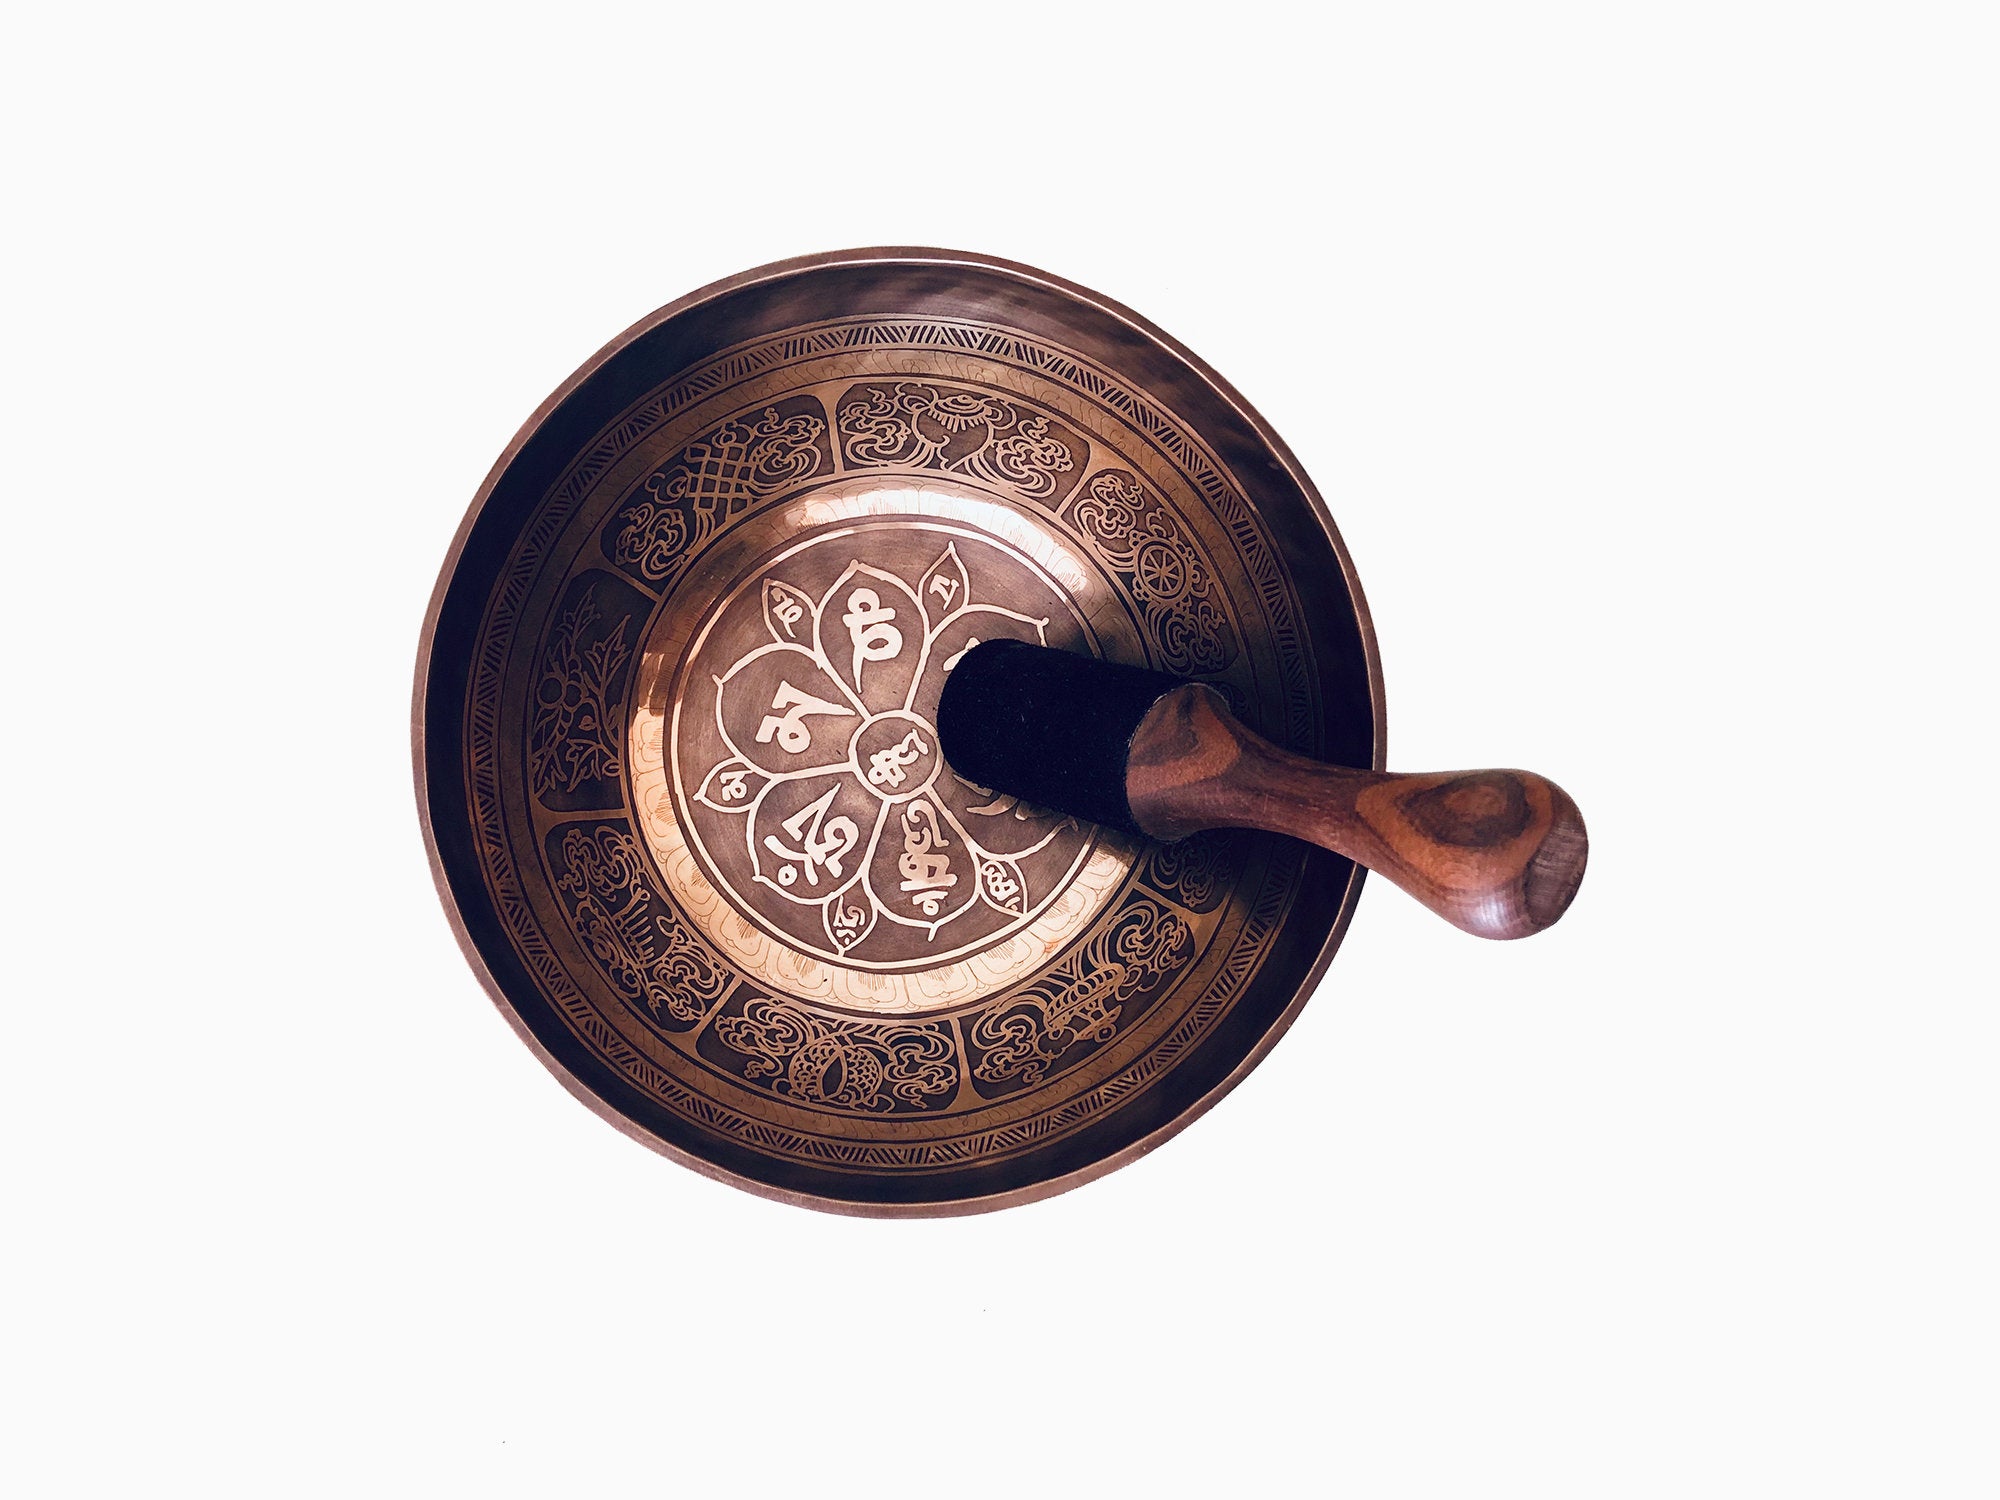 5 Tibetan Handmade Singing Bowl for Meditation and Healing through Vibration handcrafted in Nepal by Thamelmart